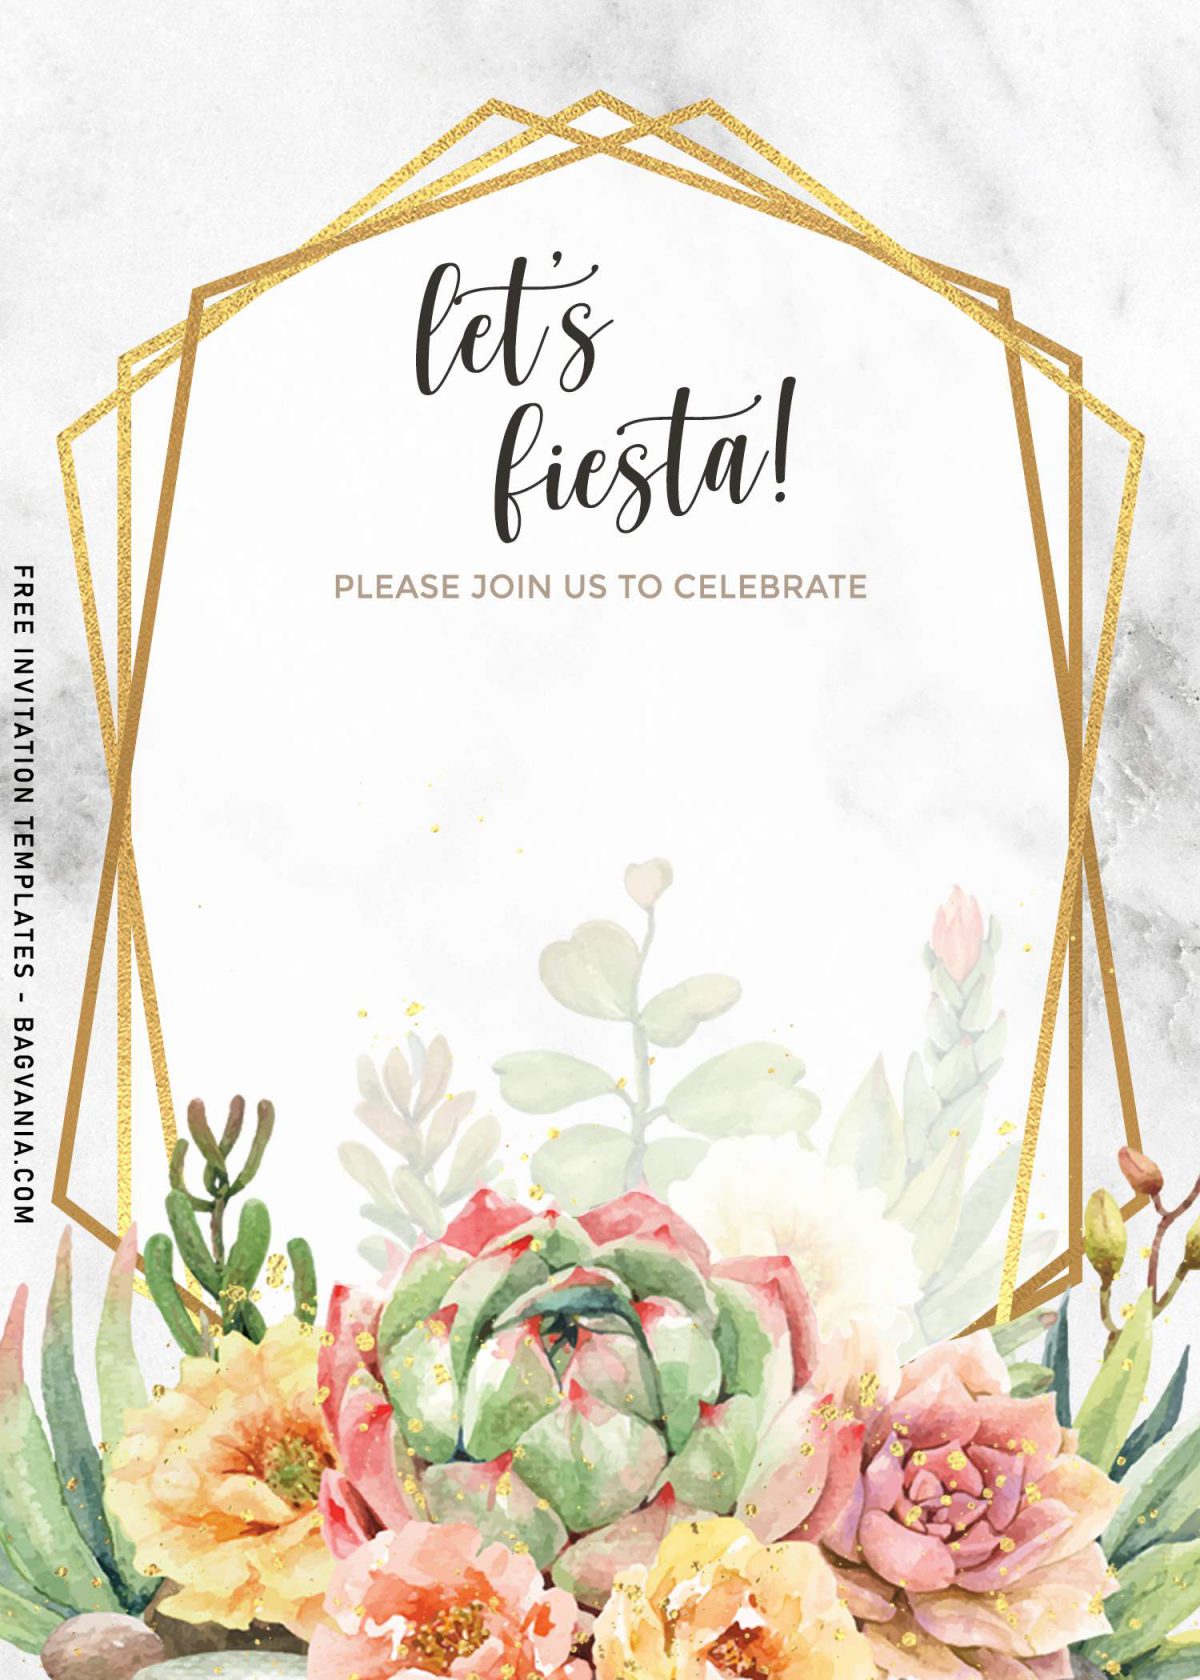 8+ Stunning Cactus Watercolor Geometric Birthday Invitation Templates and has let's fiesta wording